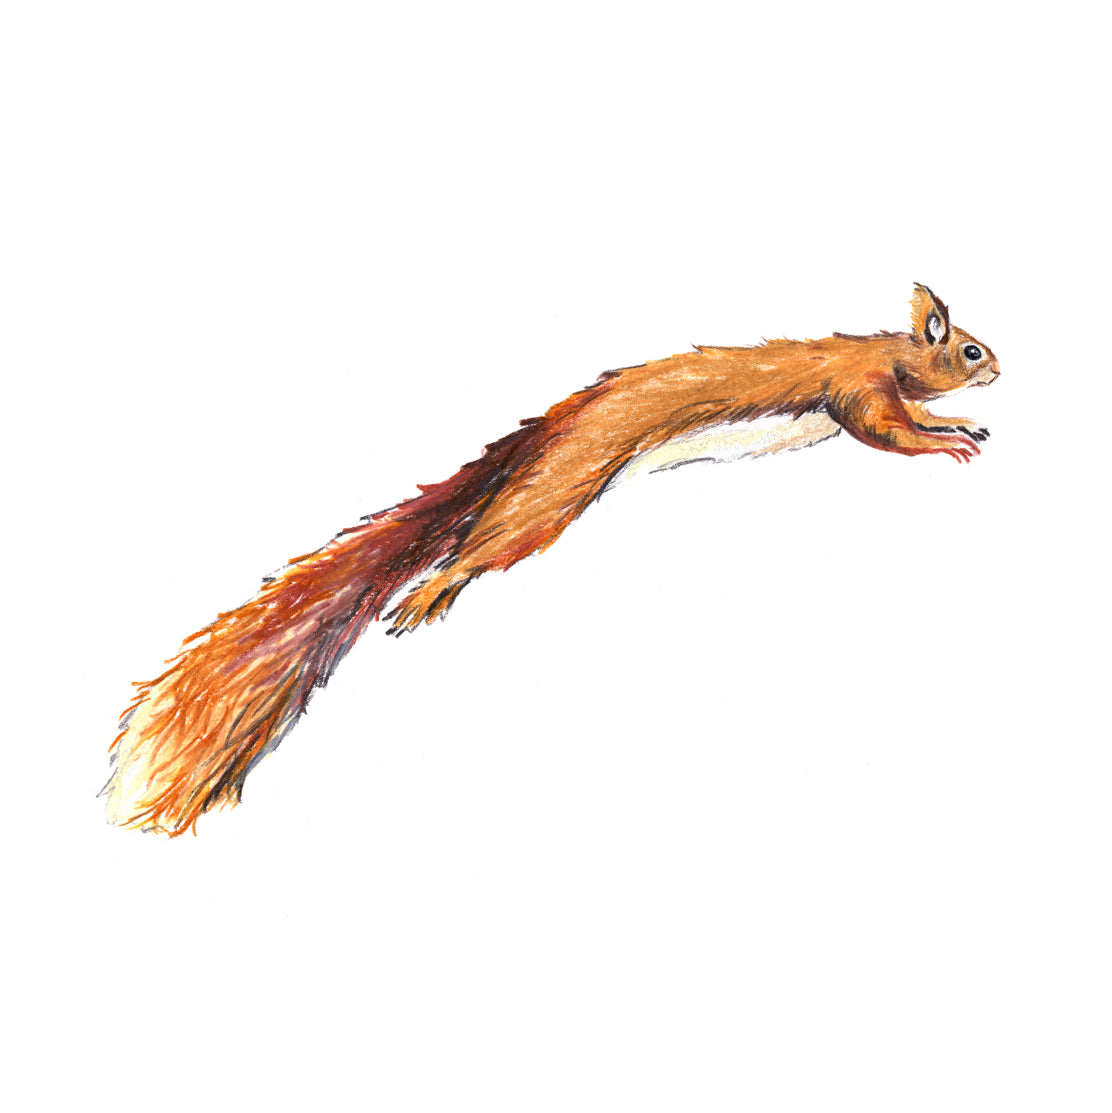 Red squirrel by Angus Grant Art